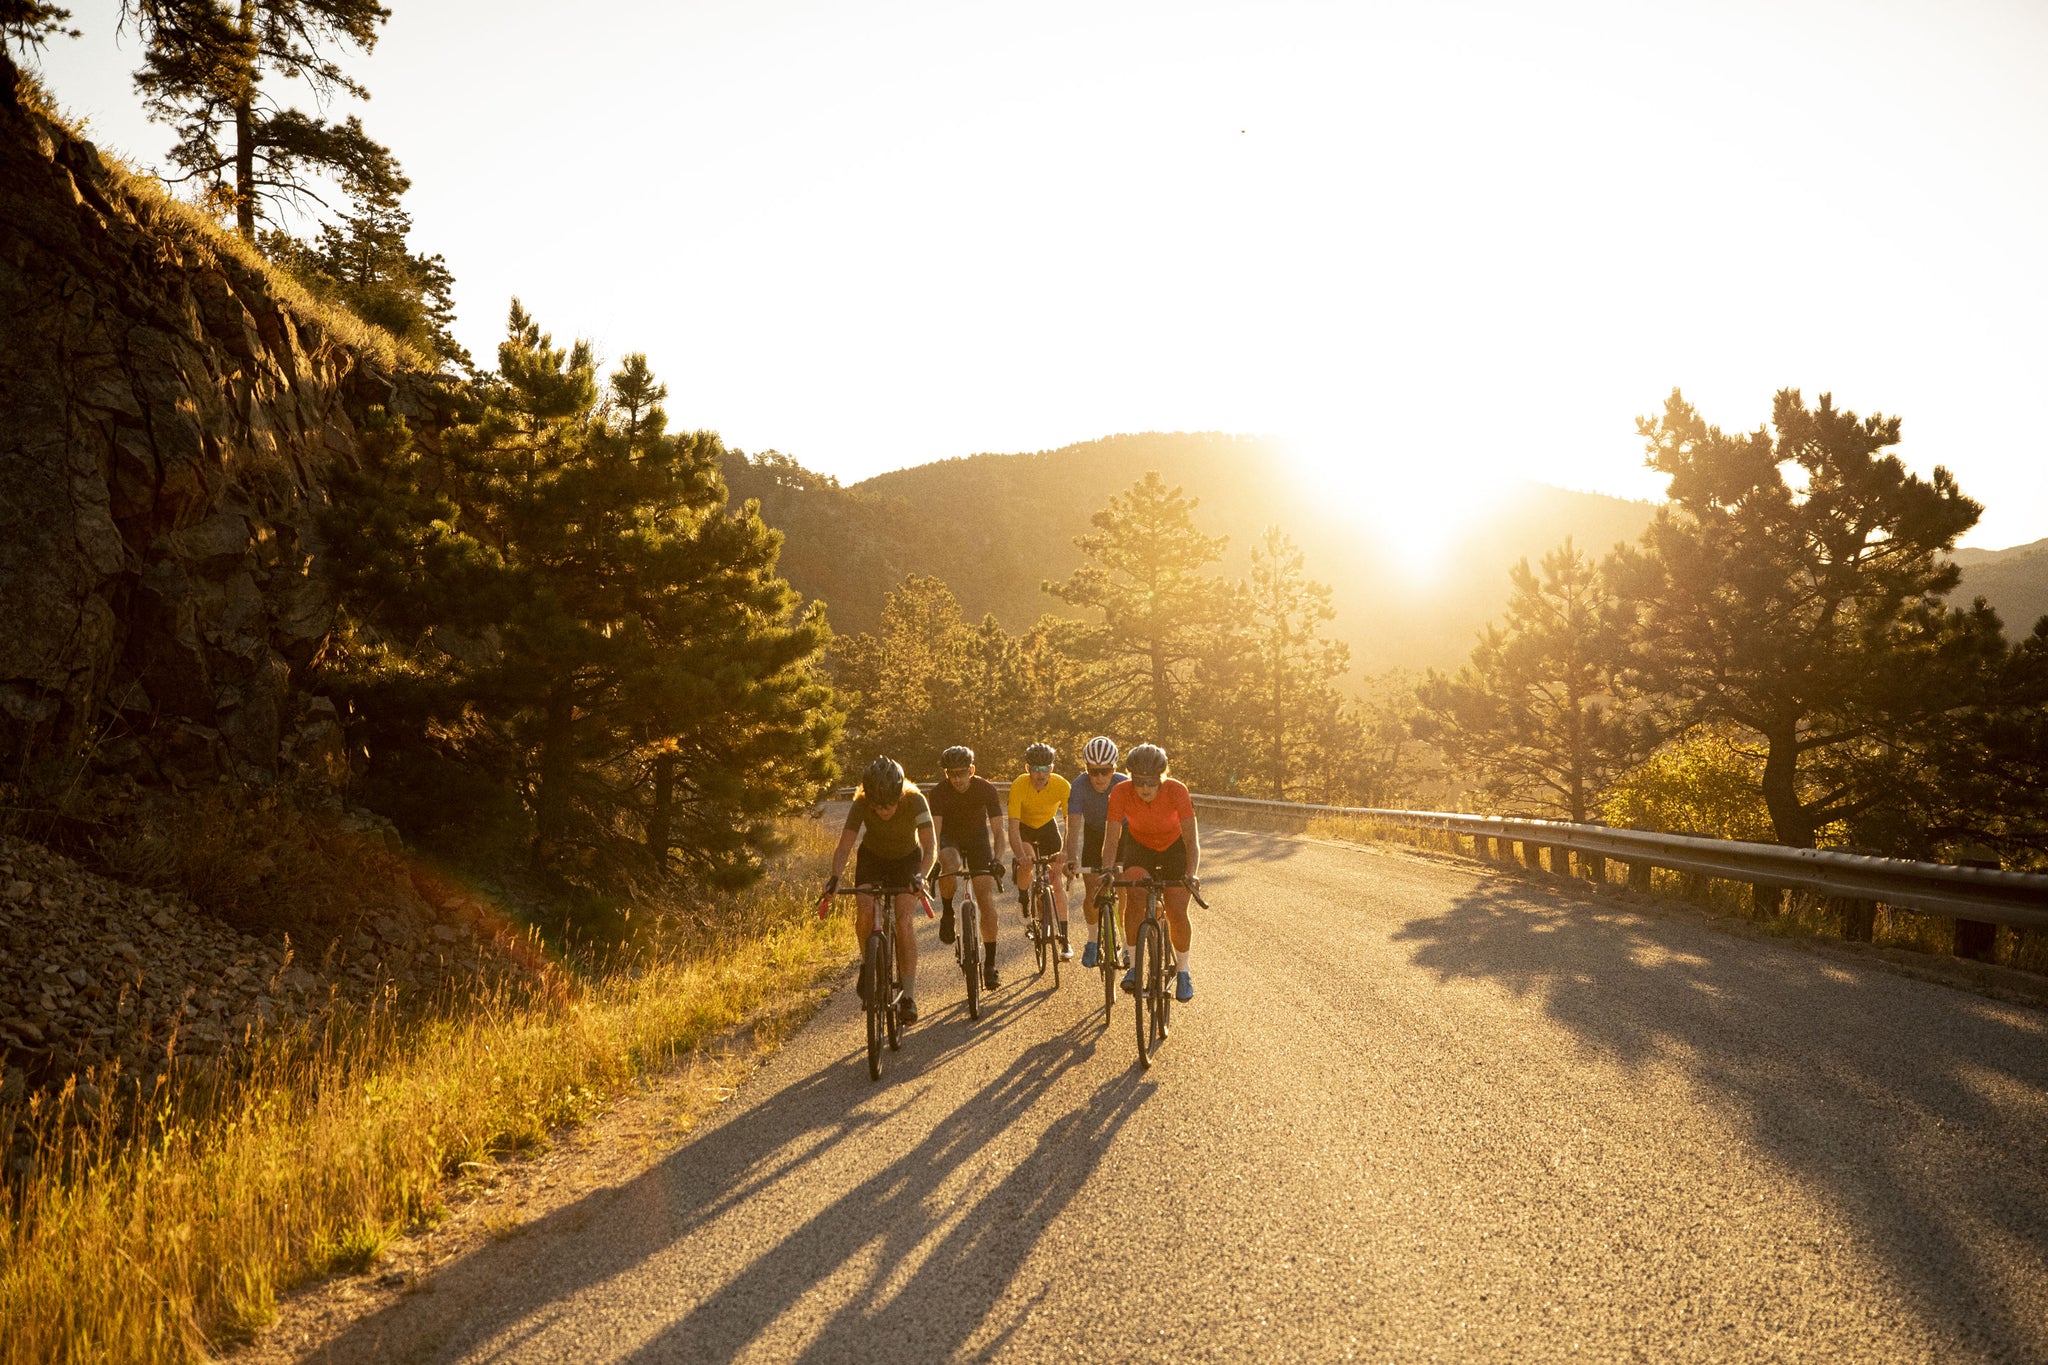 Cyclists climbing a road at sunrise